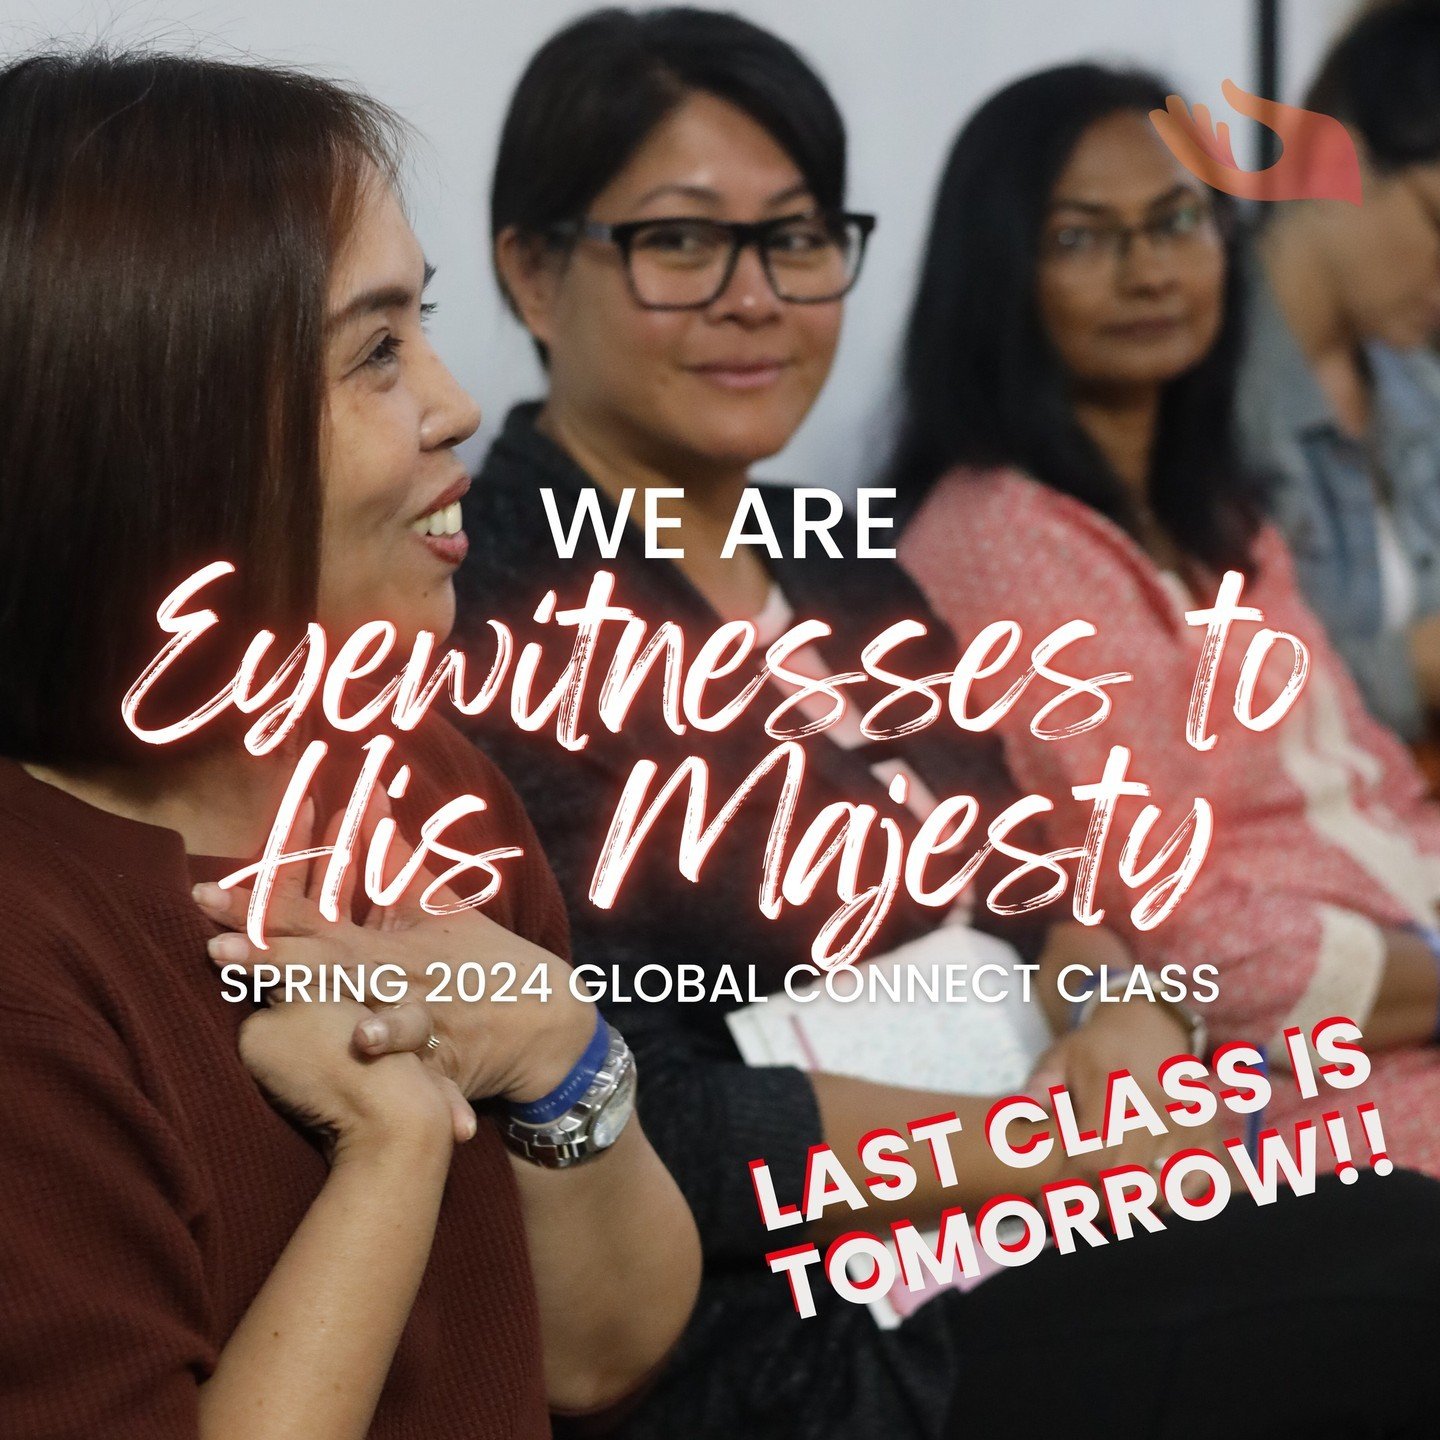 LAST CLASS IS TOMORROW! Don't forget to get your papers done and sent to your directors! See you at 9am EST!⁠
⁠
#beammissionsfoundation #icoc #christian